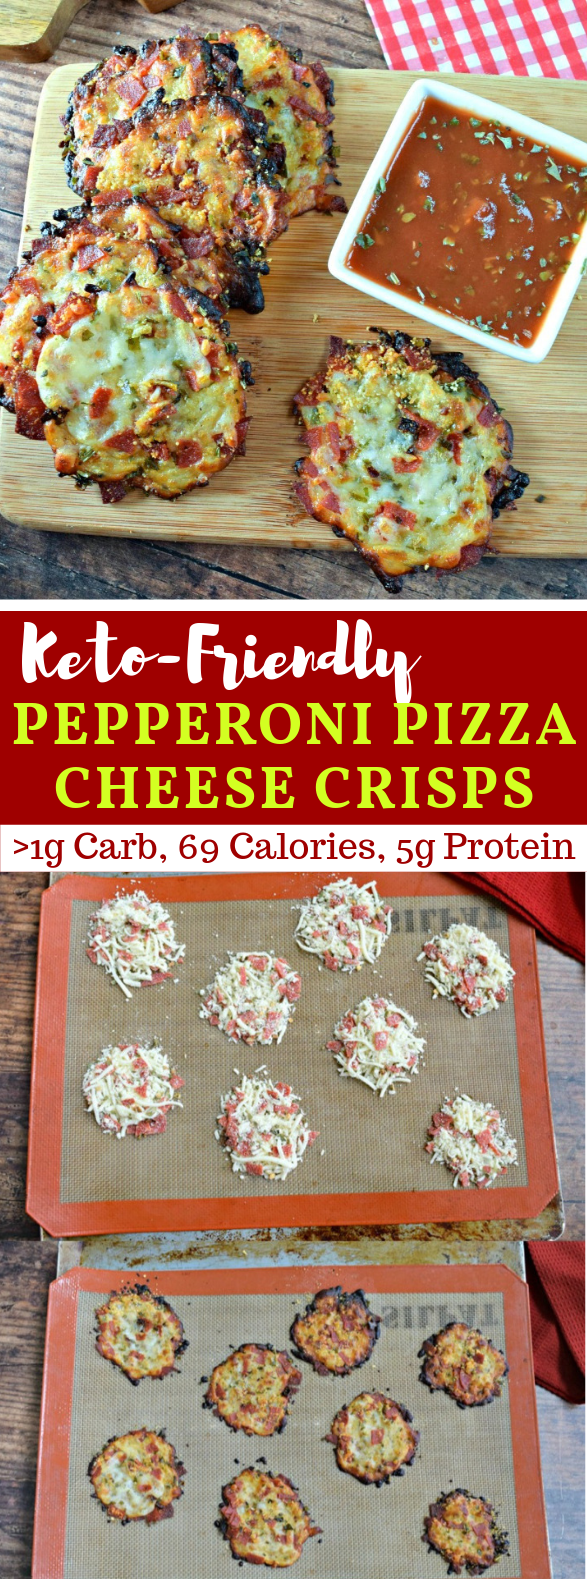 Pepperoni Pizza Cheese Crisps | Keto & Low Carb #diet #ketogenic